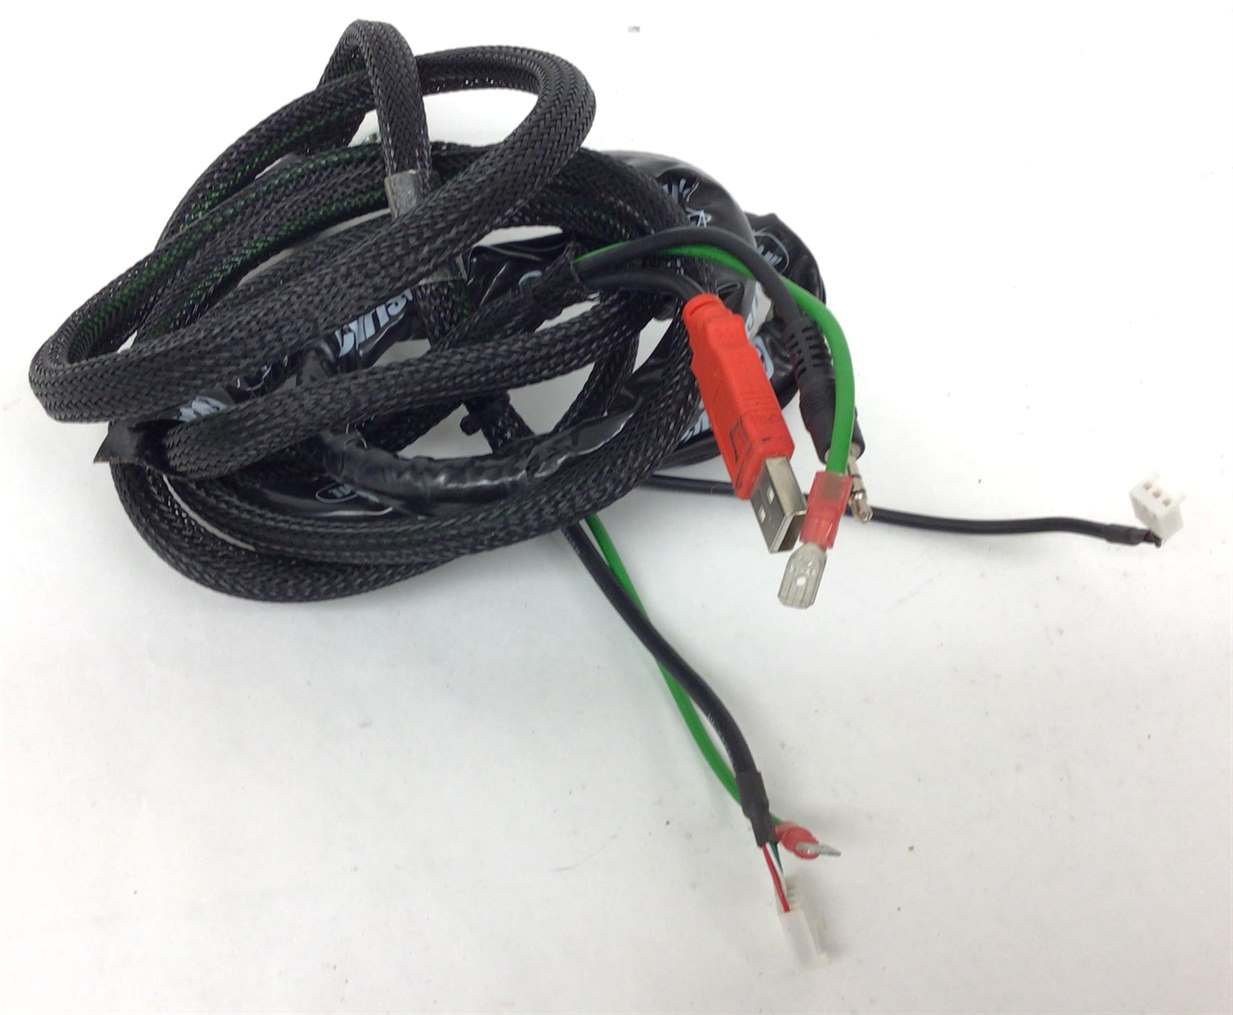 Interconnect Wire Harness Bundle with USB (Used)